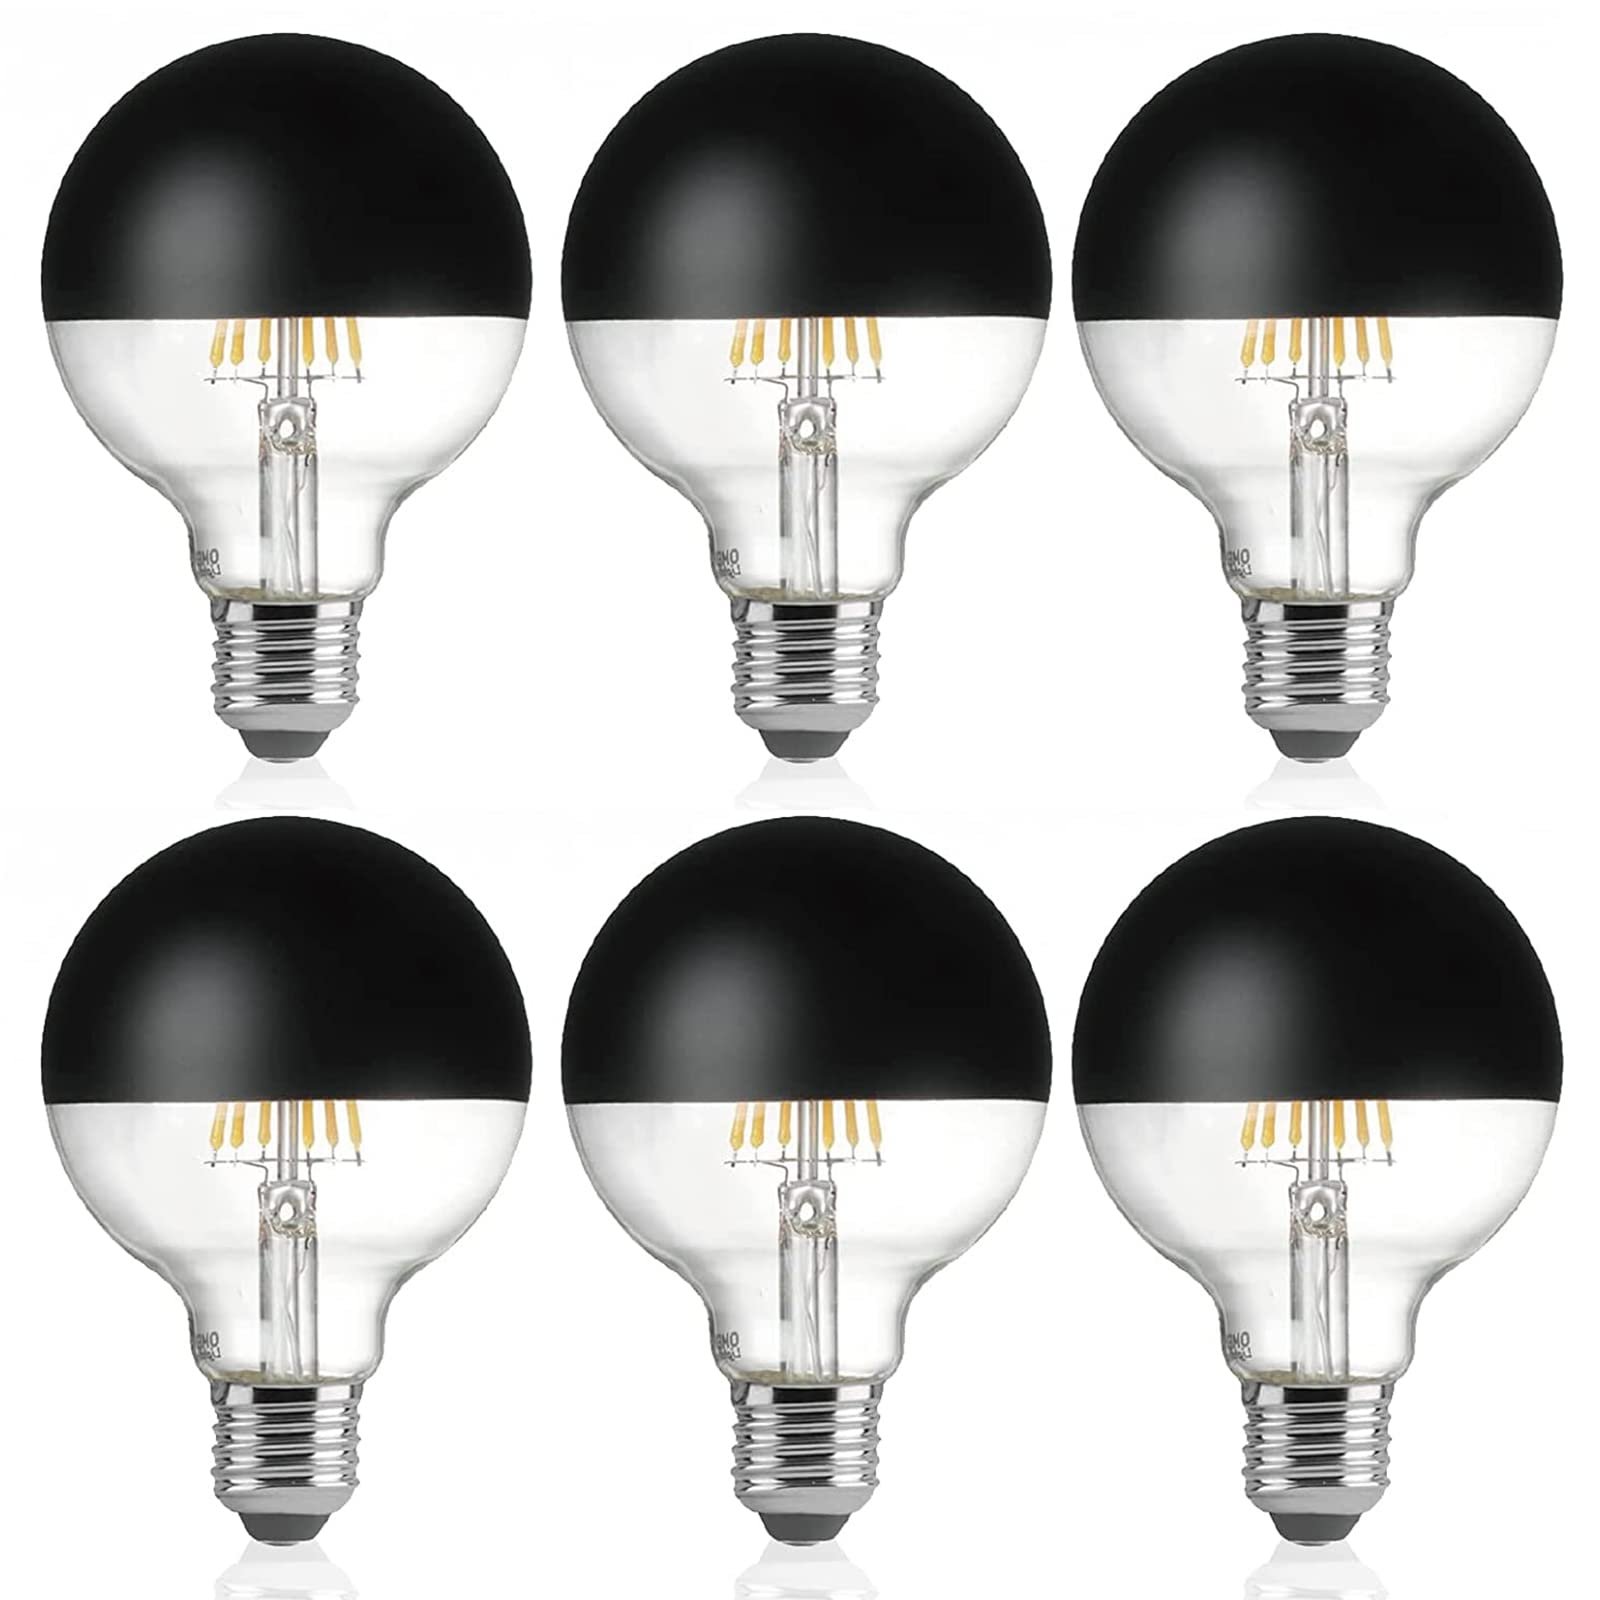 OMED G80 Anti Glare Half Black Chrome Dimmable LED Light Bulbs 6 Pack, E26 2700K Soft White Globe Dipped Edison Bulbs, 6 Watt 600 Lumens Large Black Tipped Round Bulbs for Bedroom, Living Room Visit the OMED Store 4.4 4.4 out of 5 stars 171 ratings | 9 answered questions $42.99